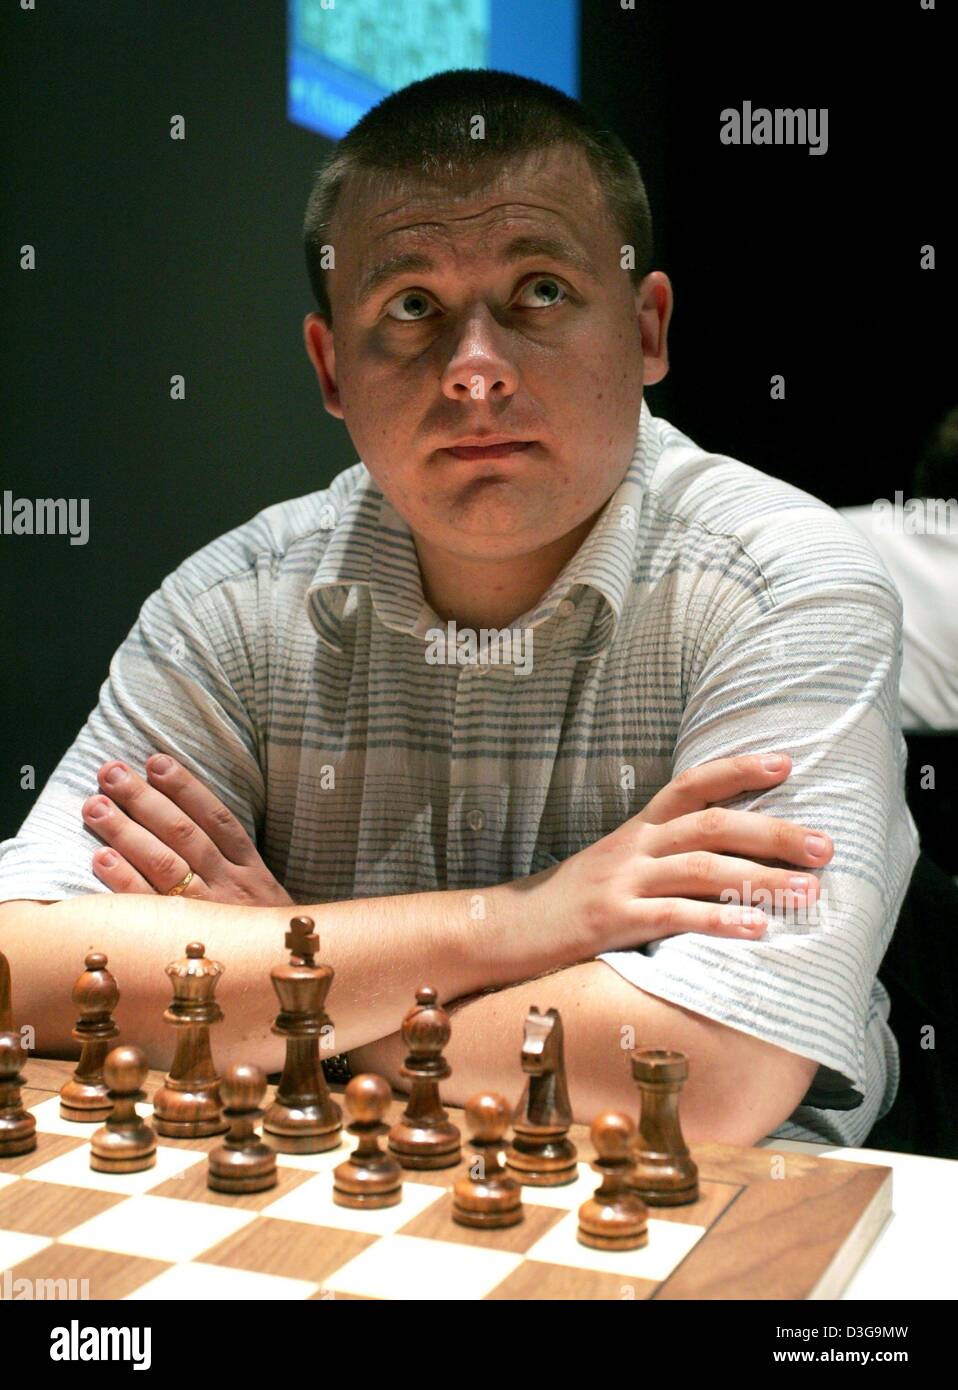 (dpa) - Russian Grandmaster Sergei Rublevski sits in front of a chess board during the 2004 Dortmund Chess Meeting in Dortmund, Germany, 23 April 2004. The event takes place at the Dortmund Theatre from 22 July to 1 August. Stock Photo